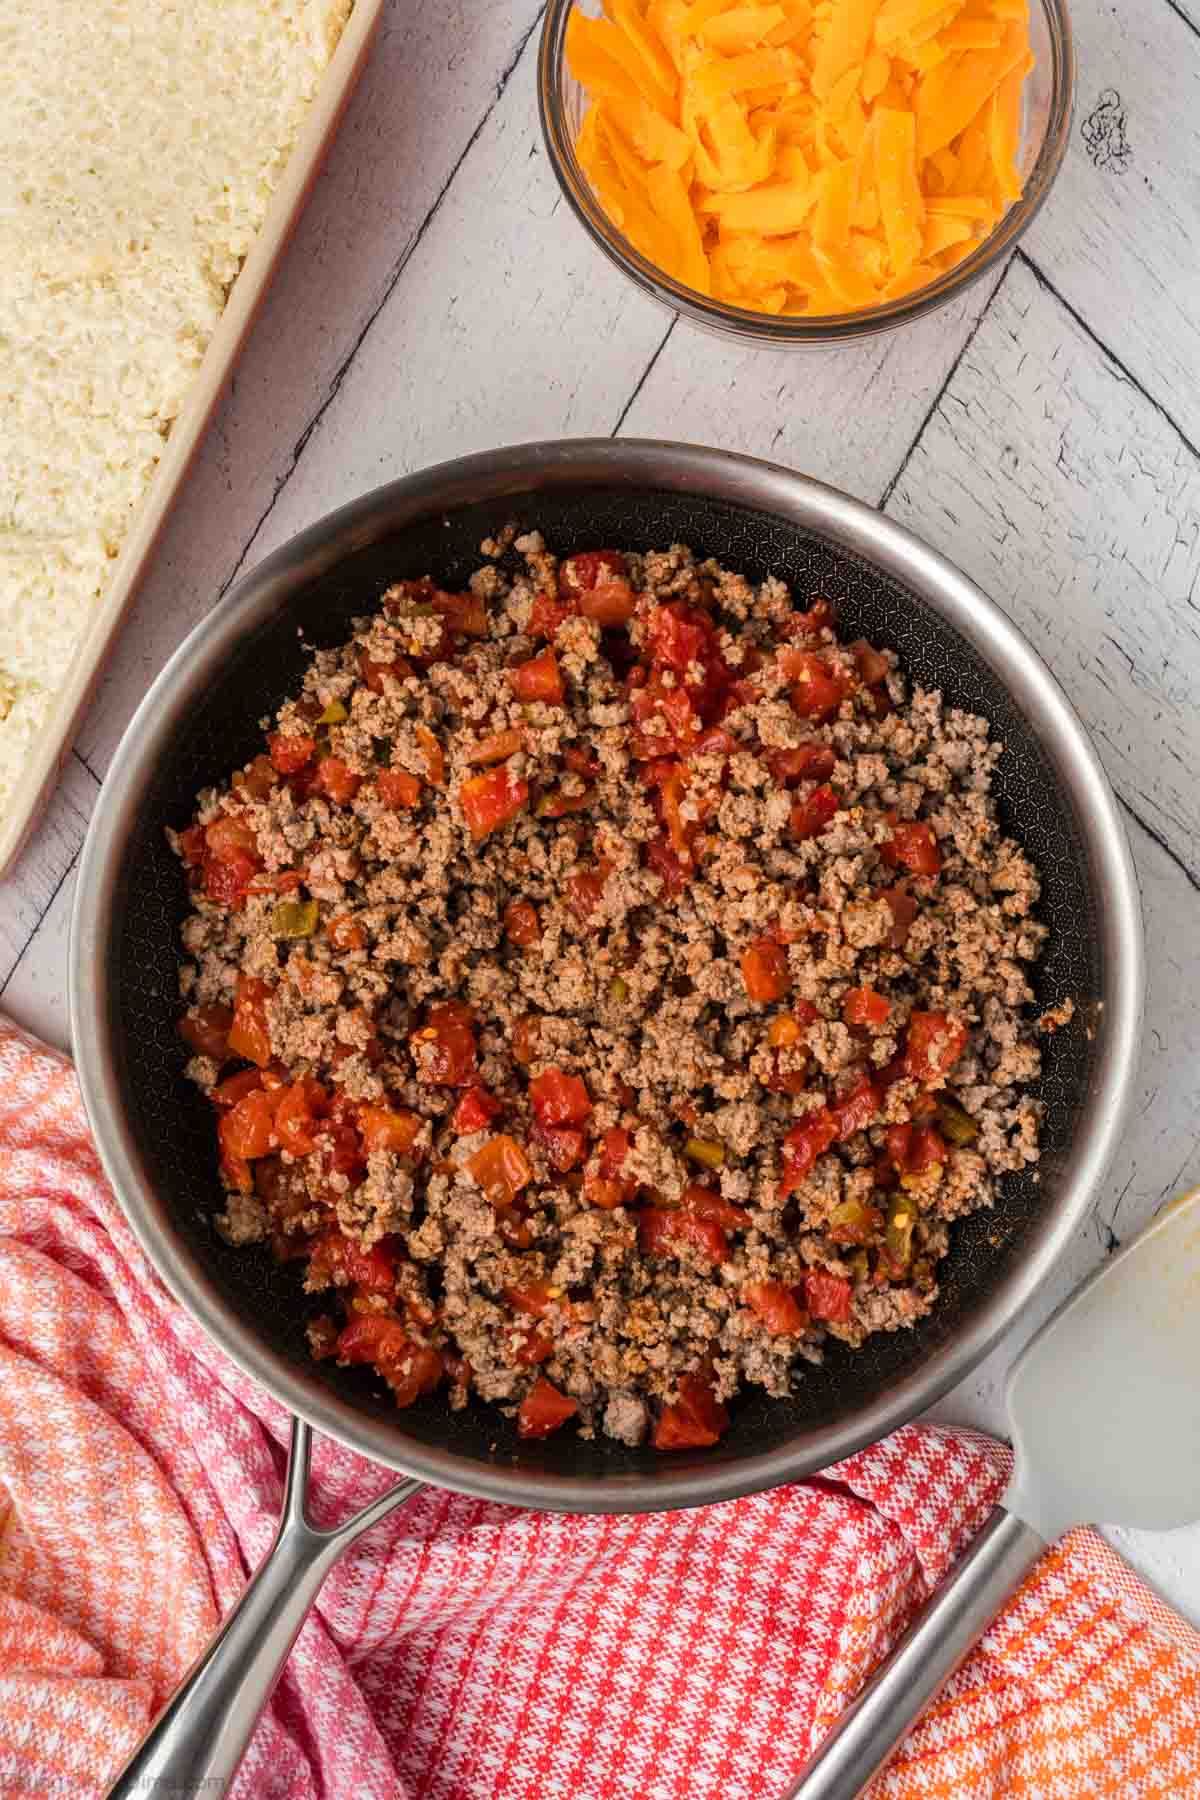 Salsa and taco seasoning mixed with the ground beef in the skillet